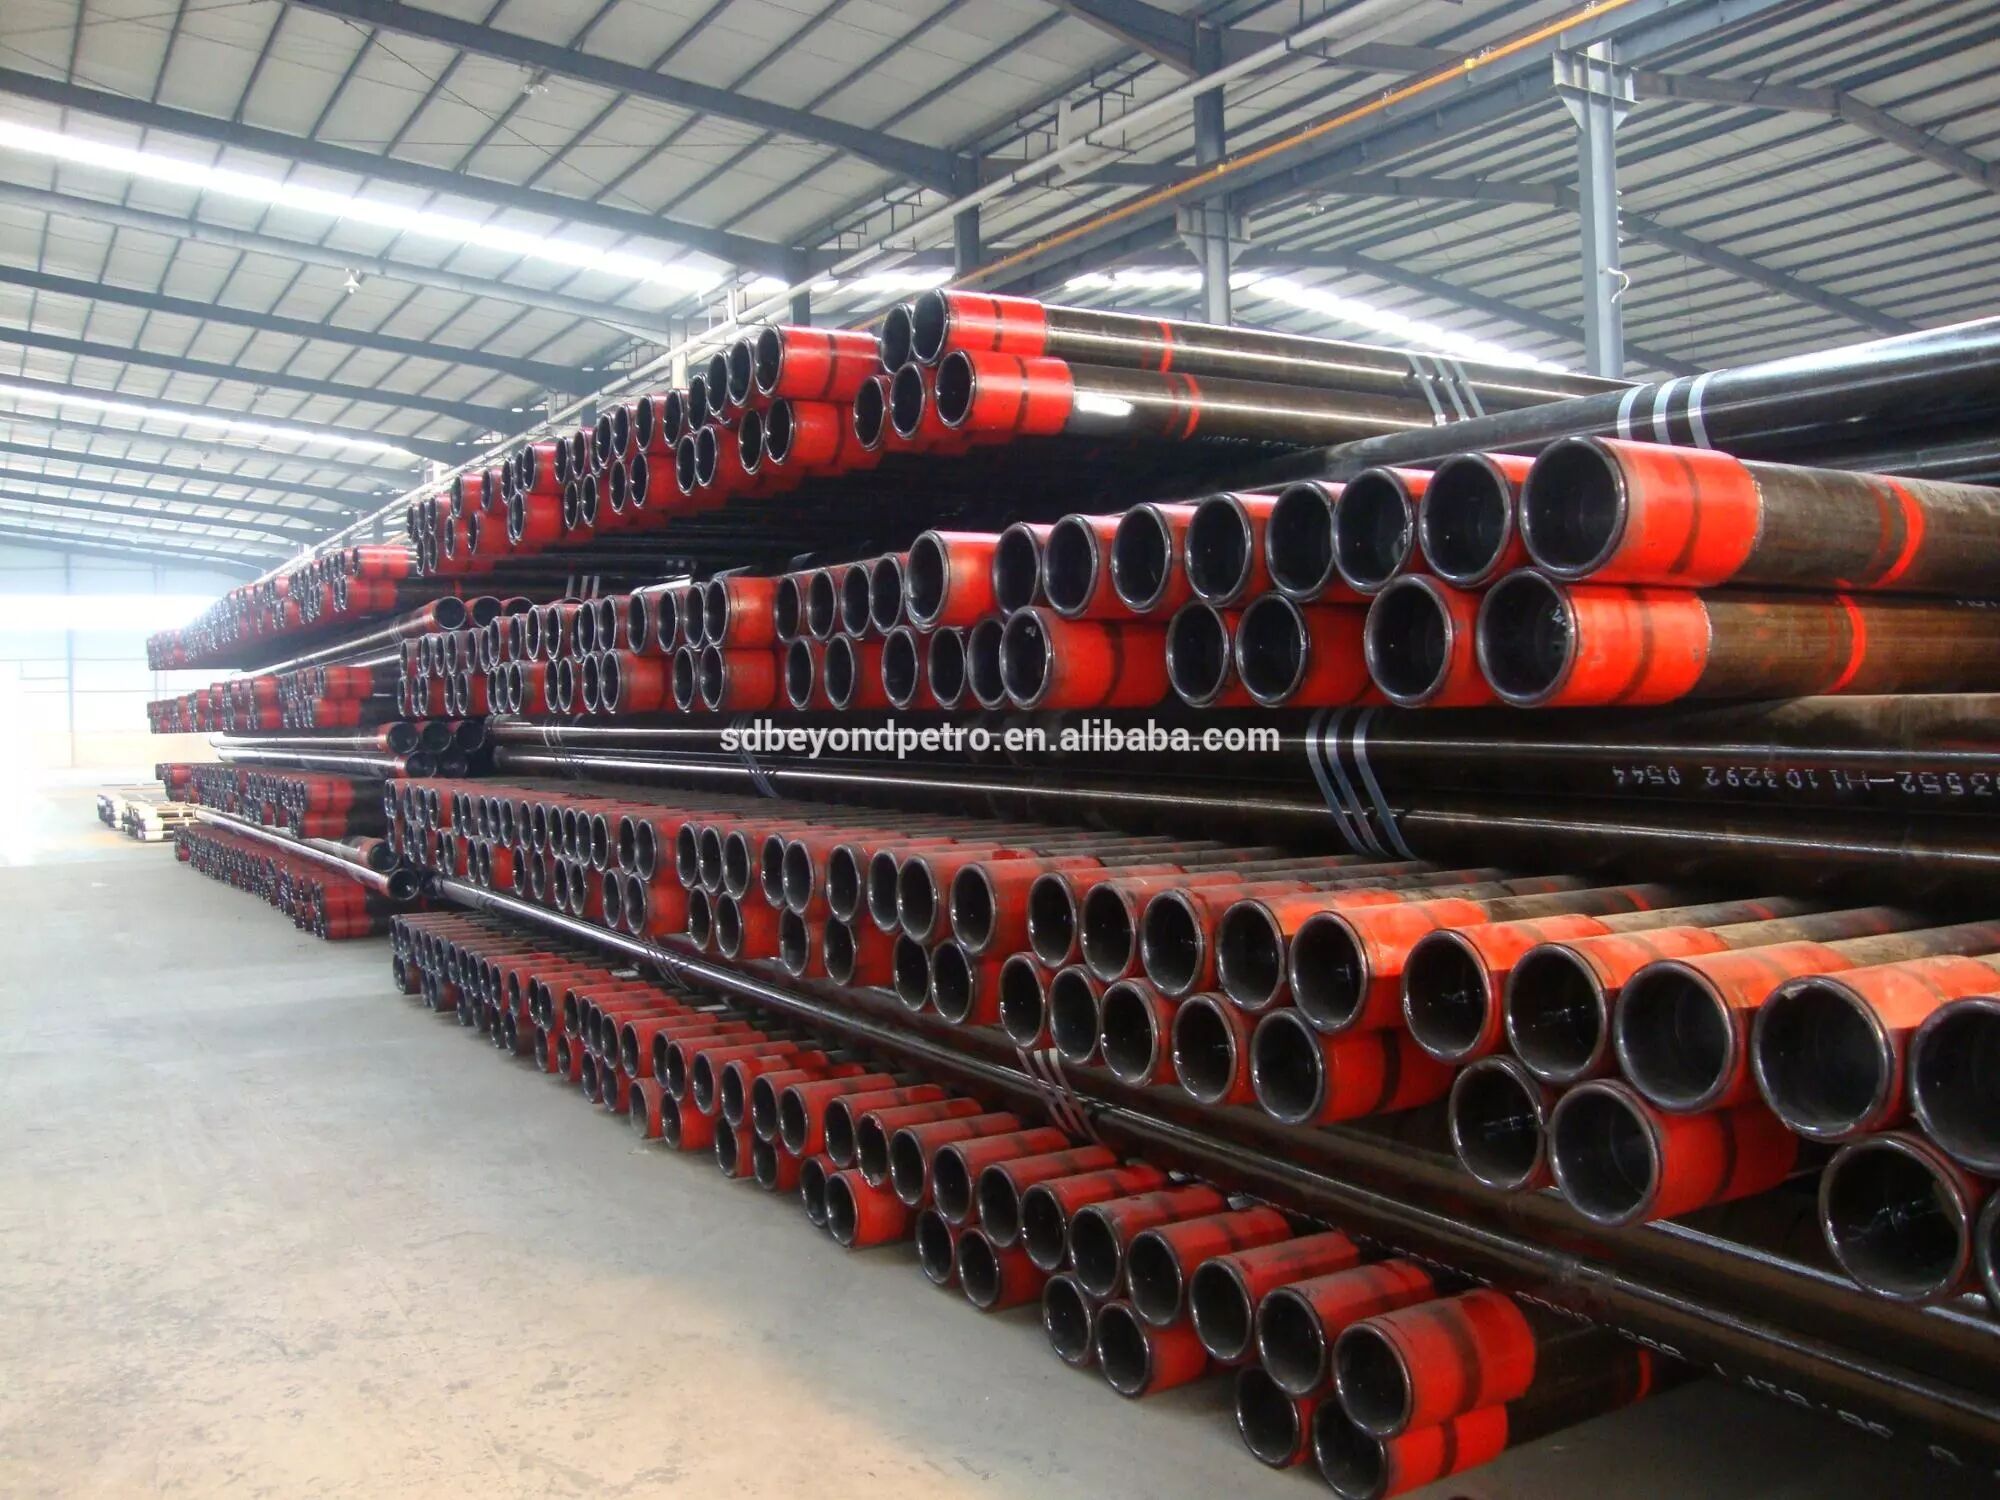 Api 51 X 52 Oil Casing Pipes Oil Casing Pipes For Oil Drilling supplier